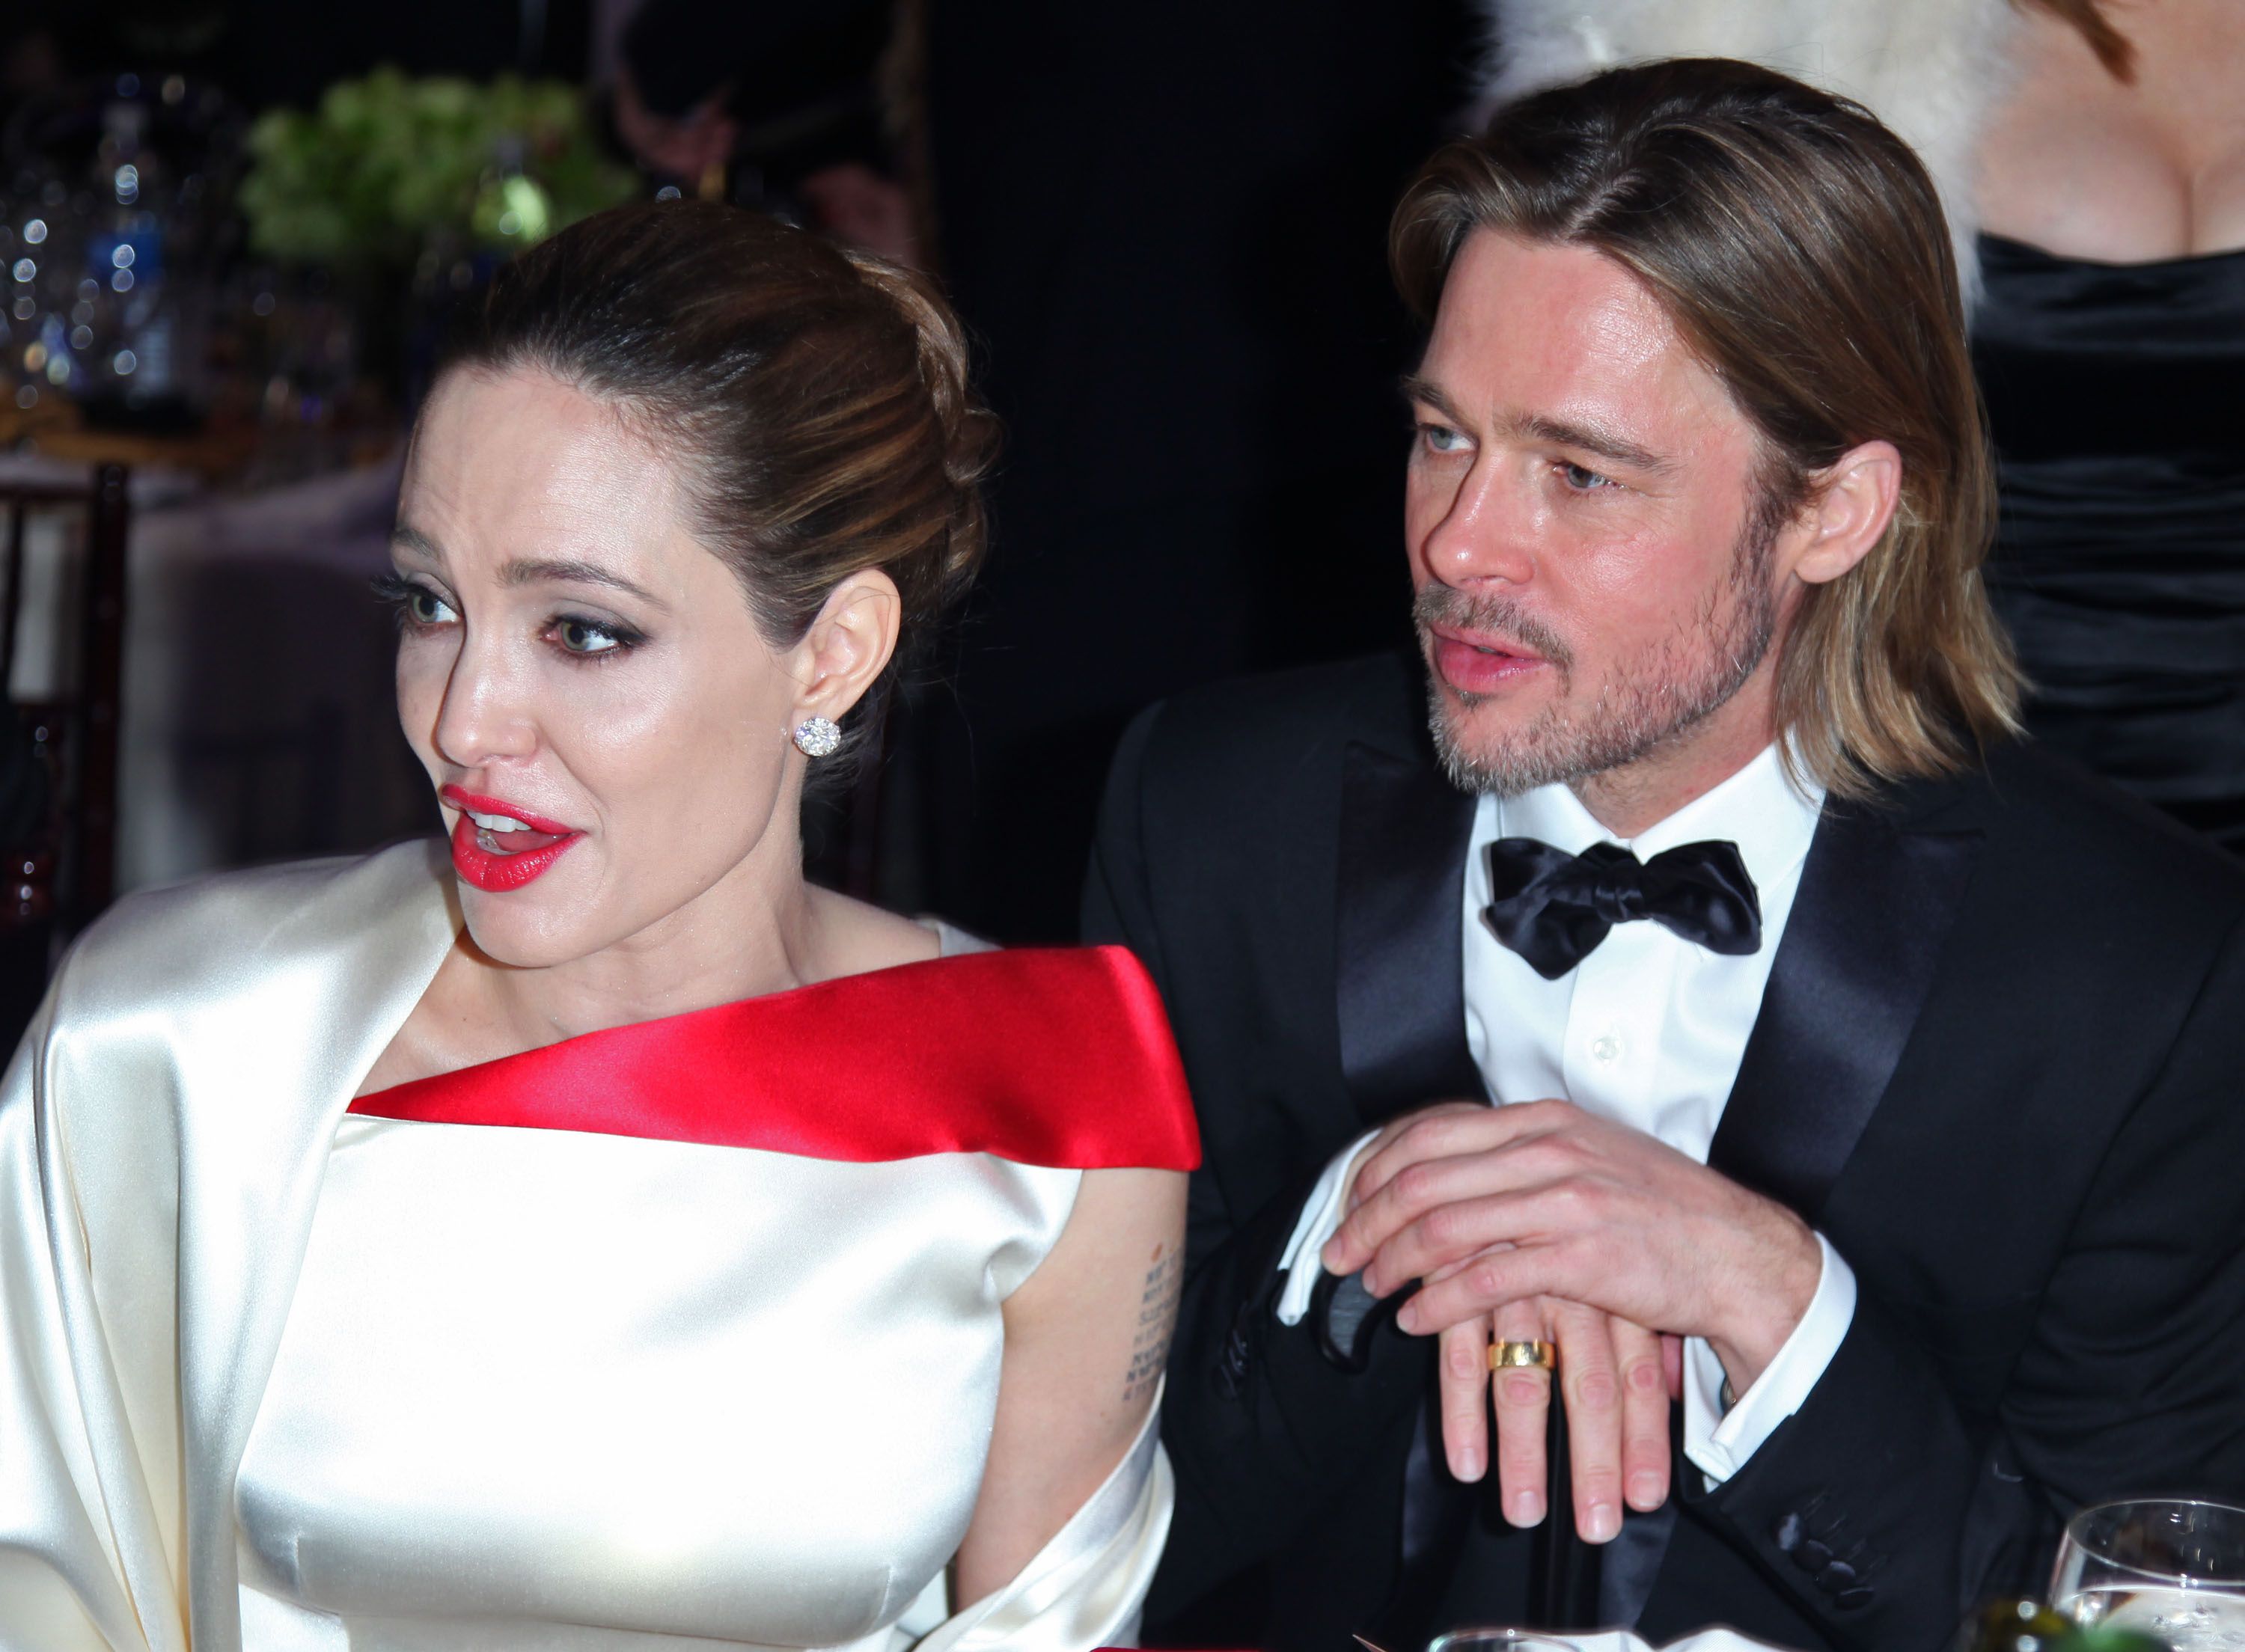 Angelina Jolie, Brad Pitt during the 69th Annual Golden Globe Awards held at the Beverly Hilton Hotel on January 15, 2012. | Source: Getty Images